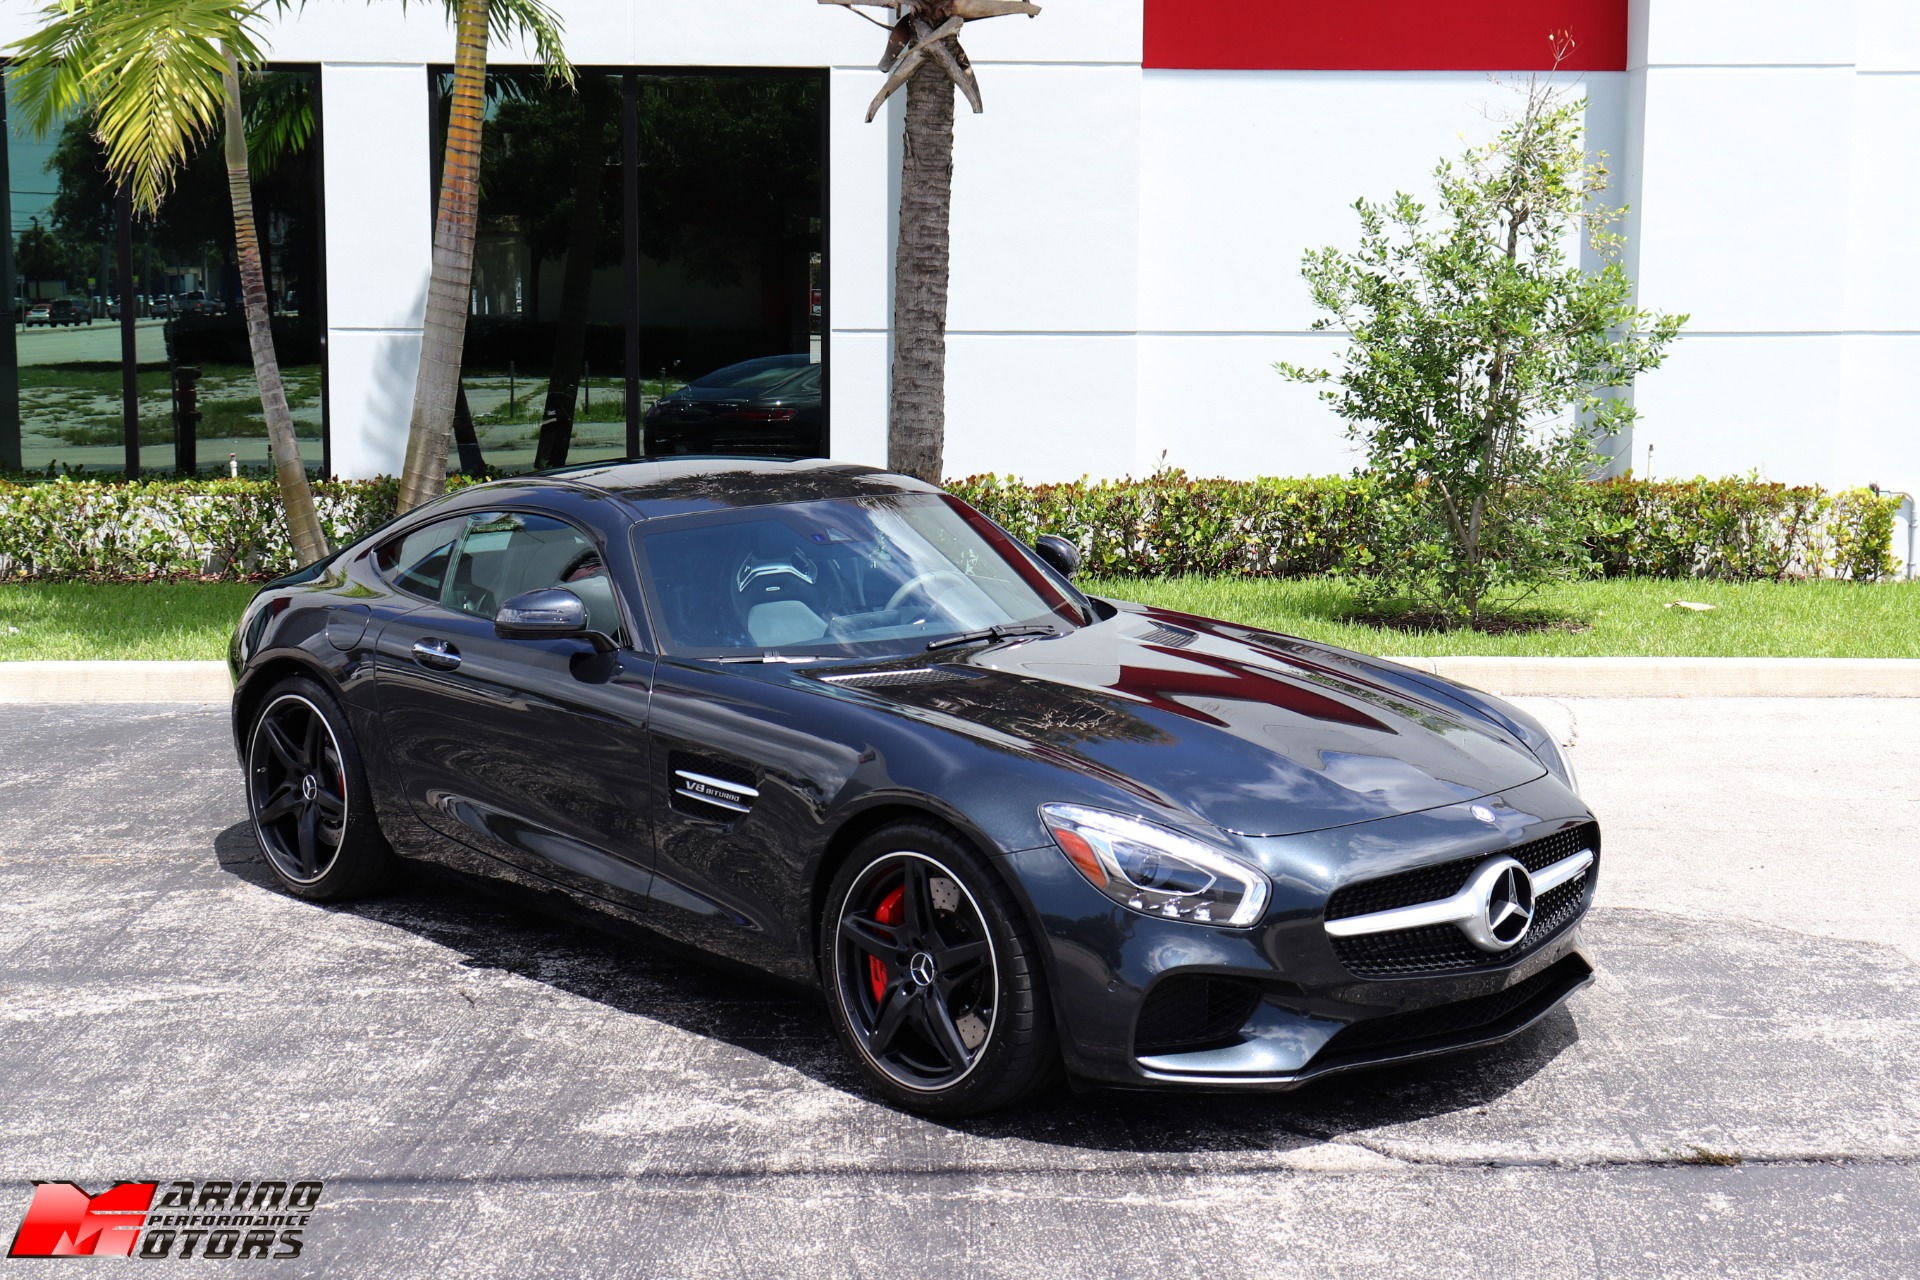 Used 2016 Mercedes-Benz AMG GT S For Sale ($94,900) | Marino 